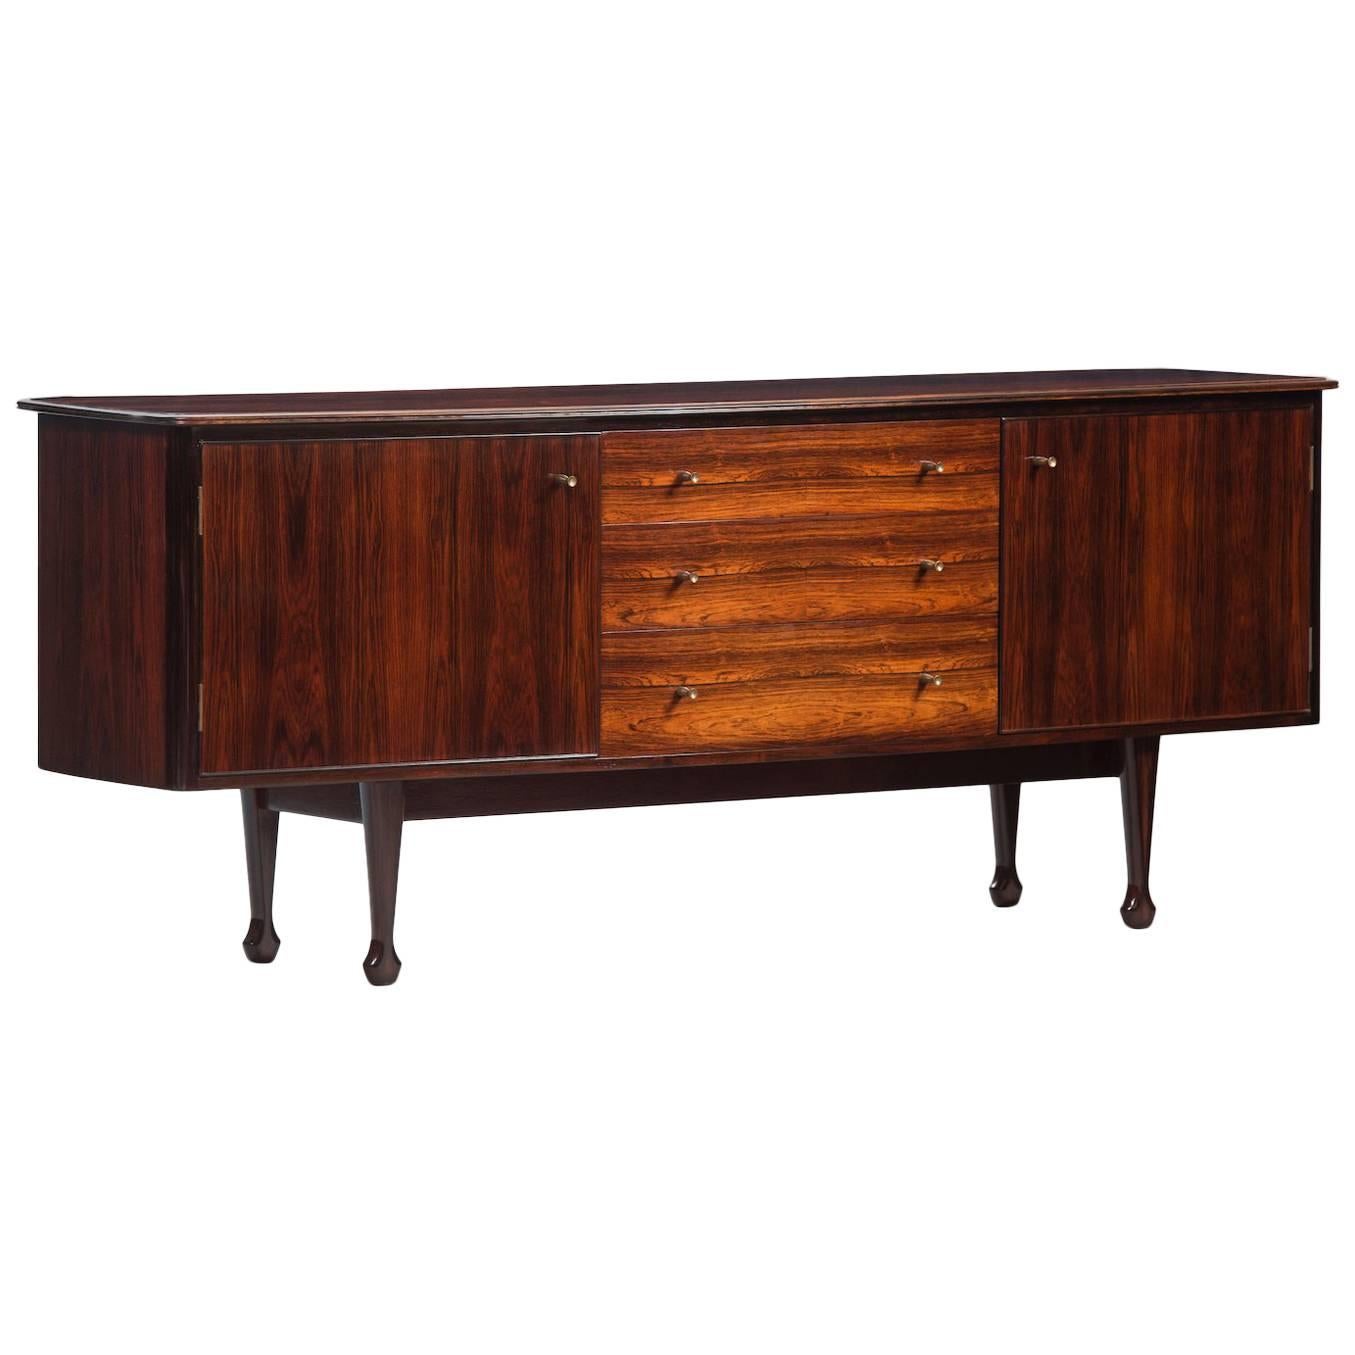 Midcentury Rosewood Sideboard from Kenia, Unique Piece